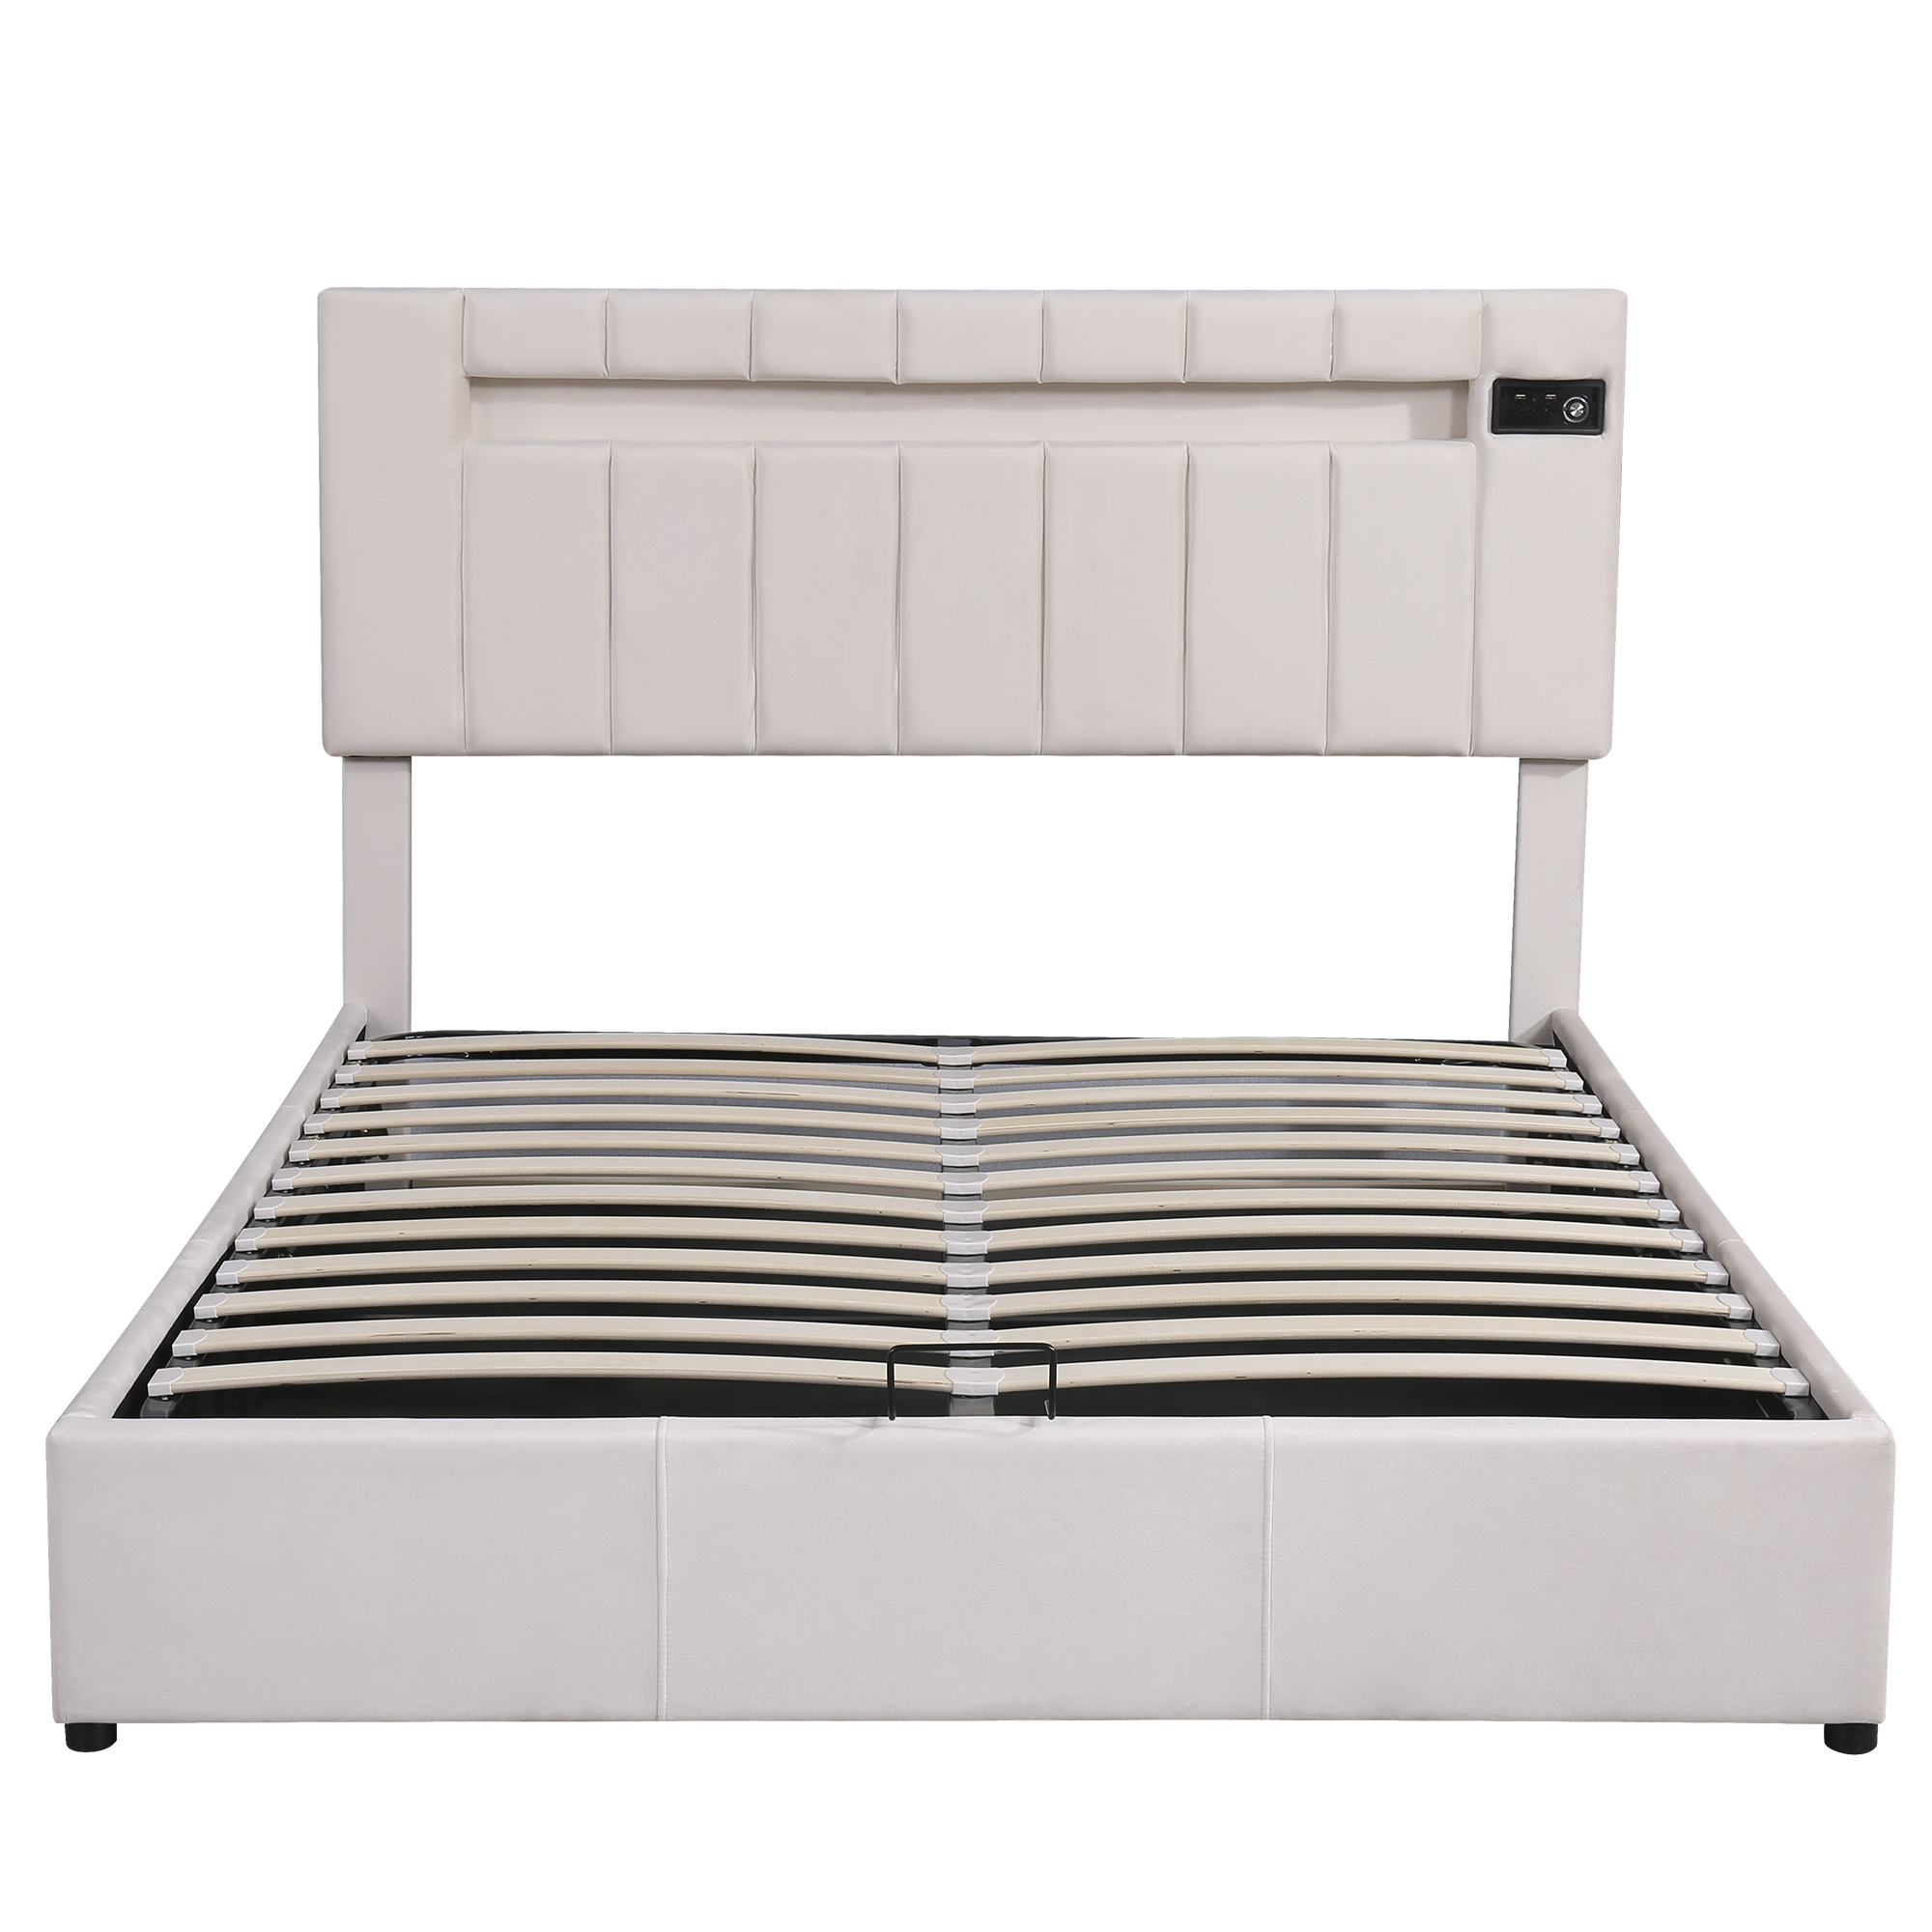 Upholstered Queen Size Bed With LED Light, Bluetooth Player And USB Charging - LP000613AAA